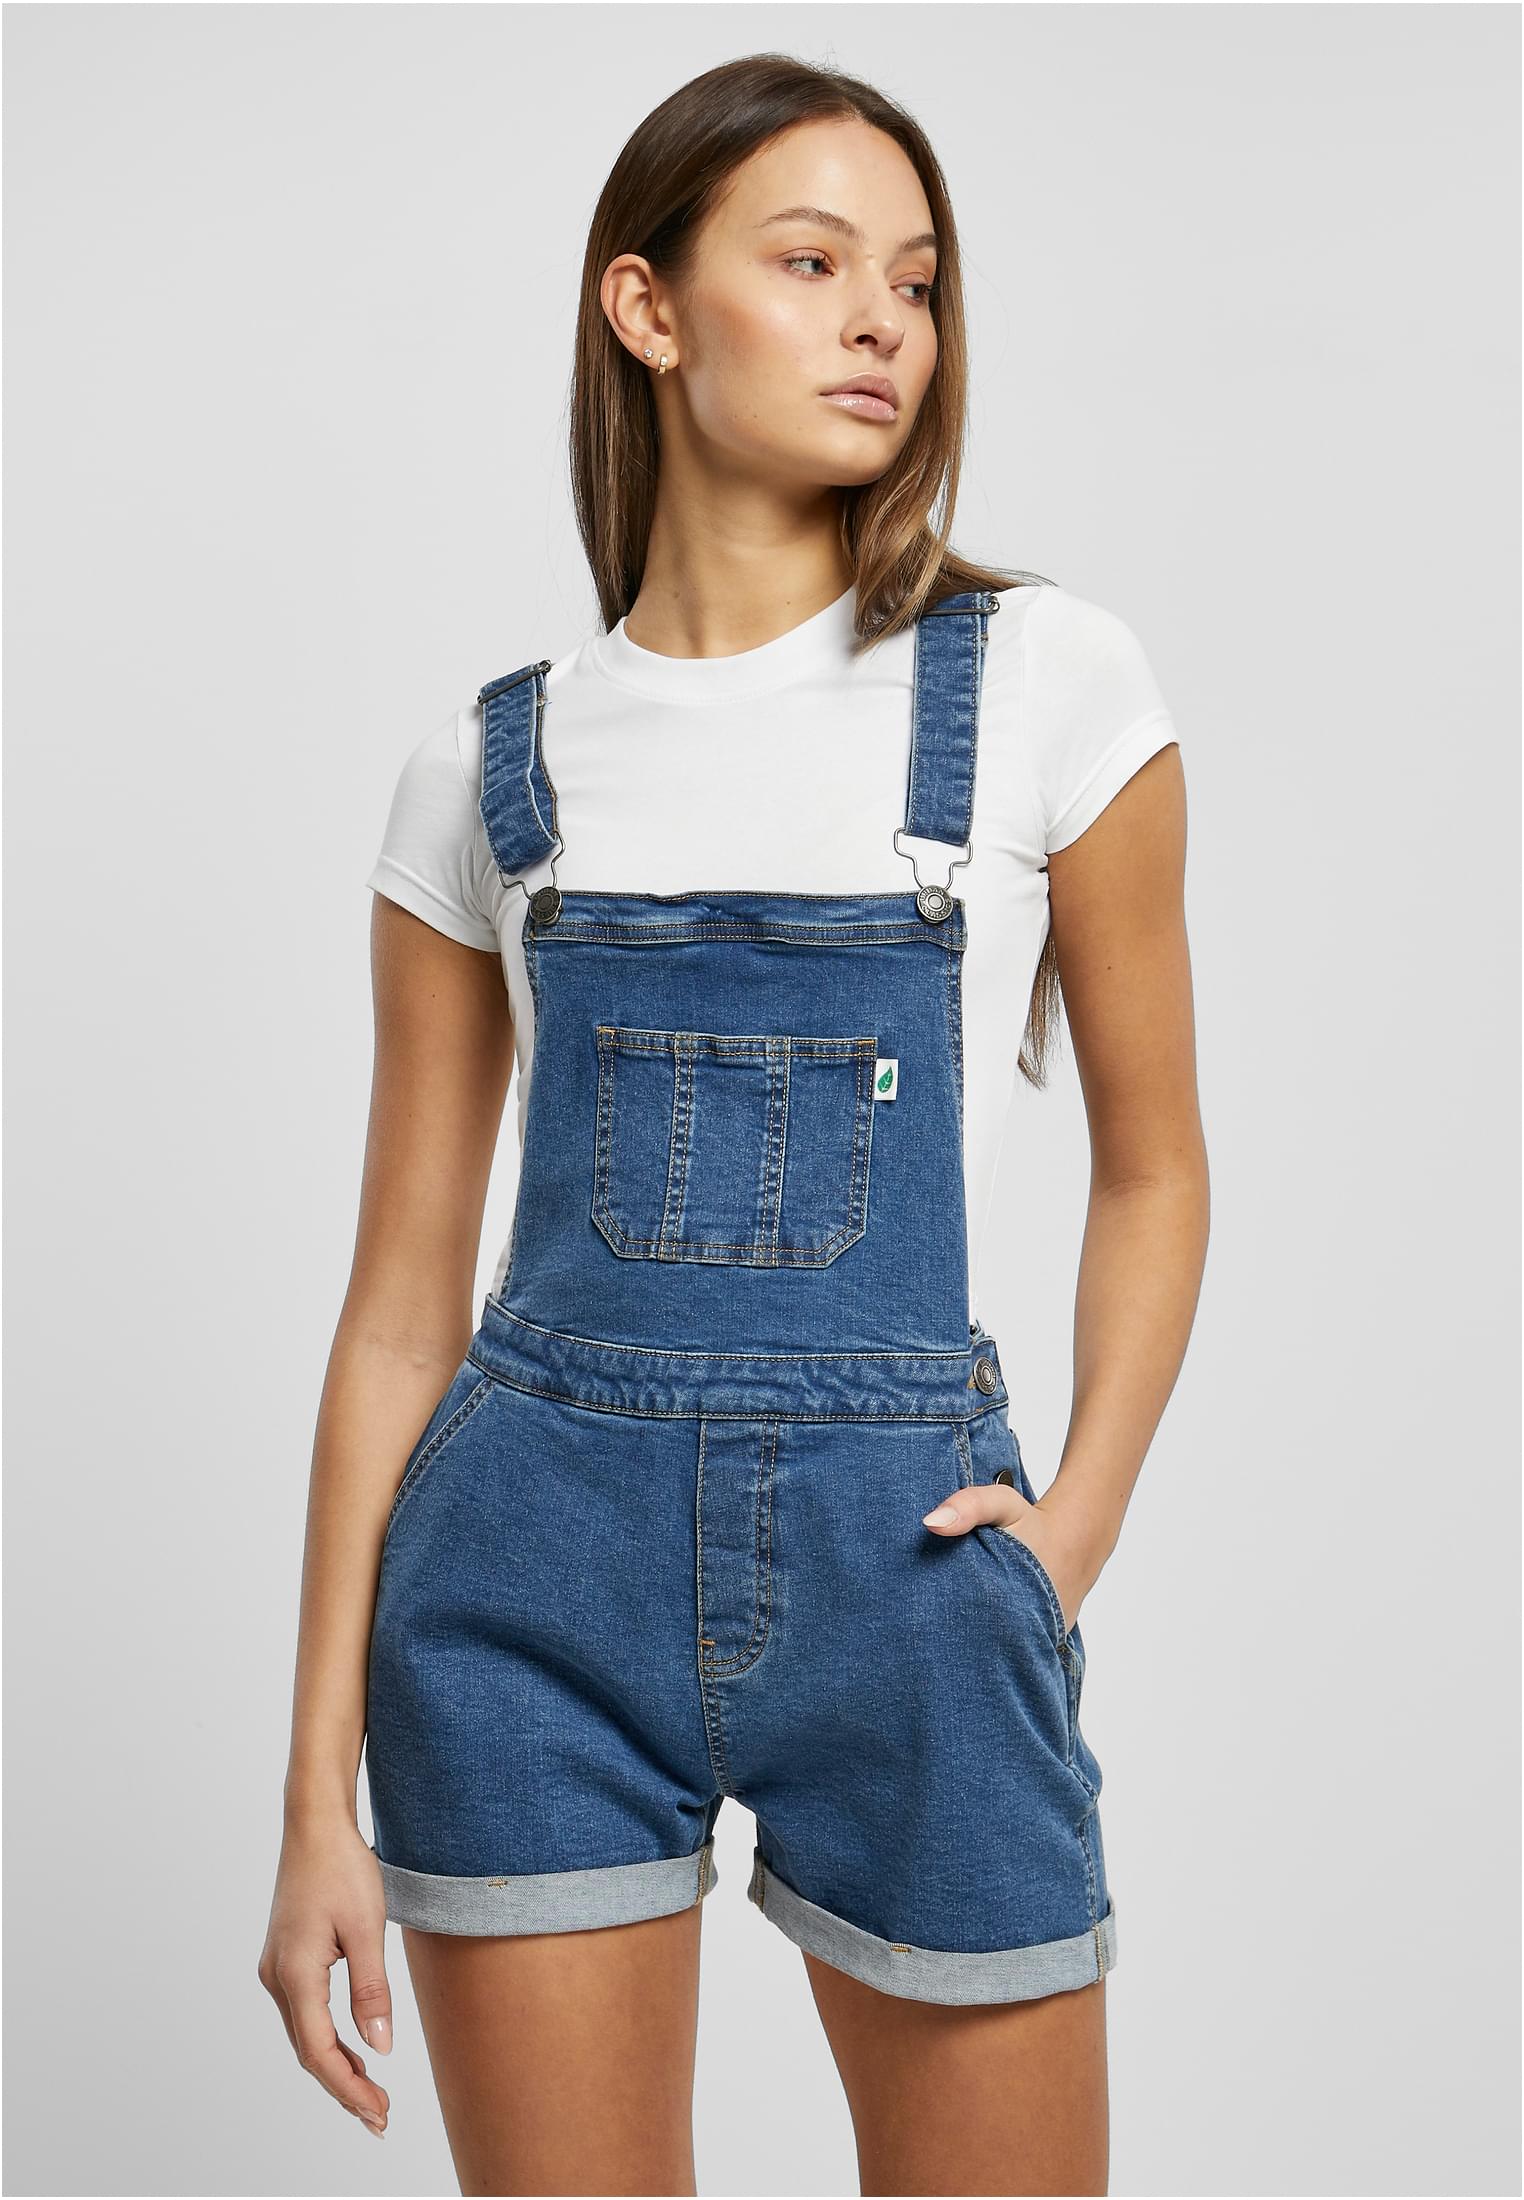 Women's Organic Shorts Dungaree Clear Blue Washed